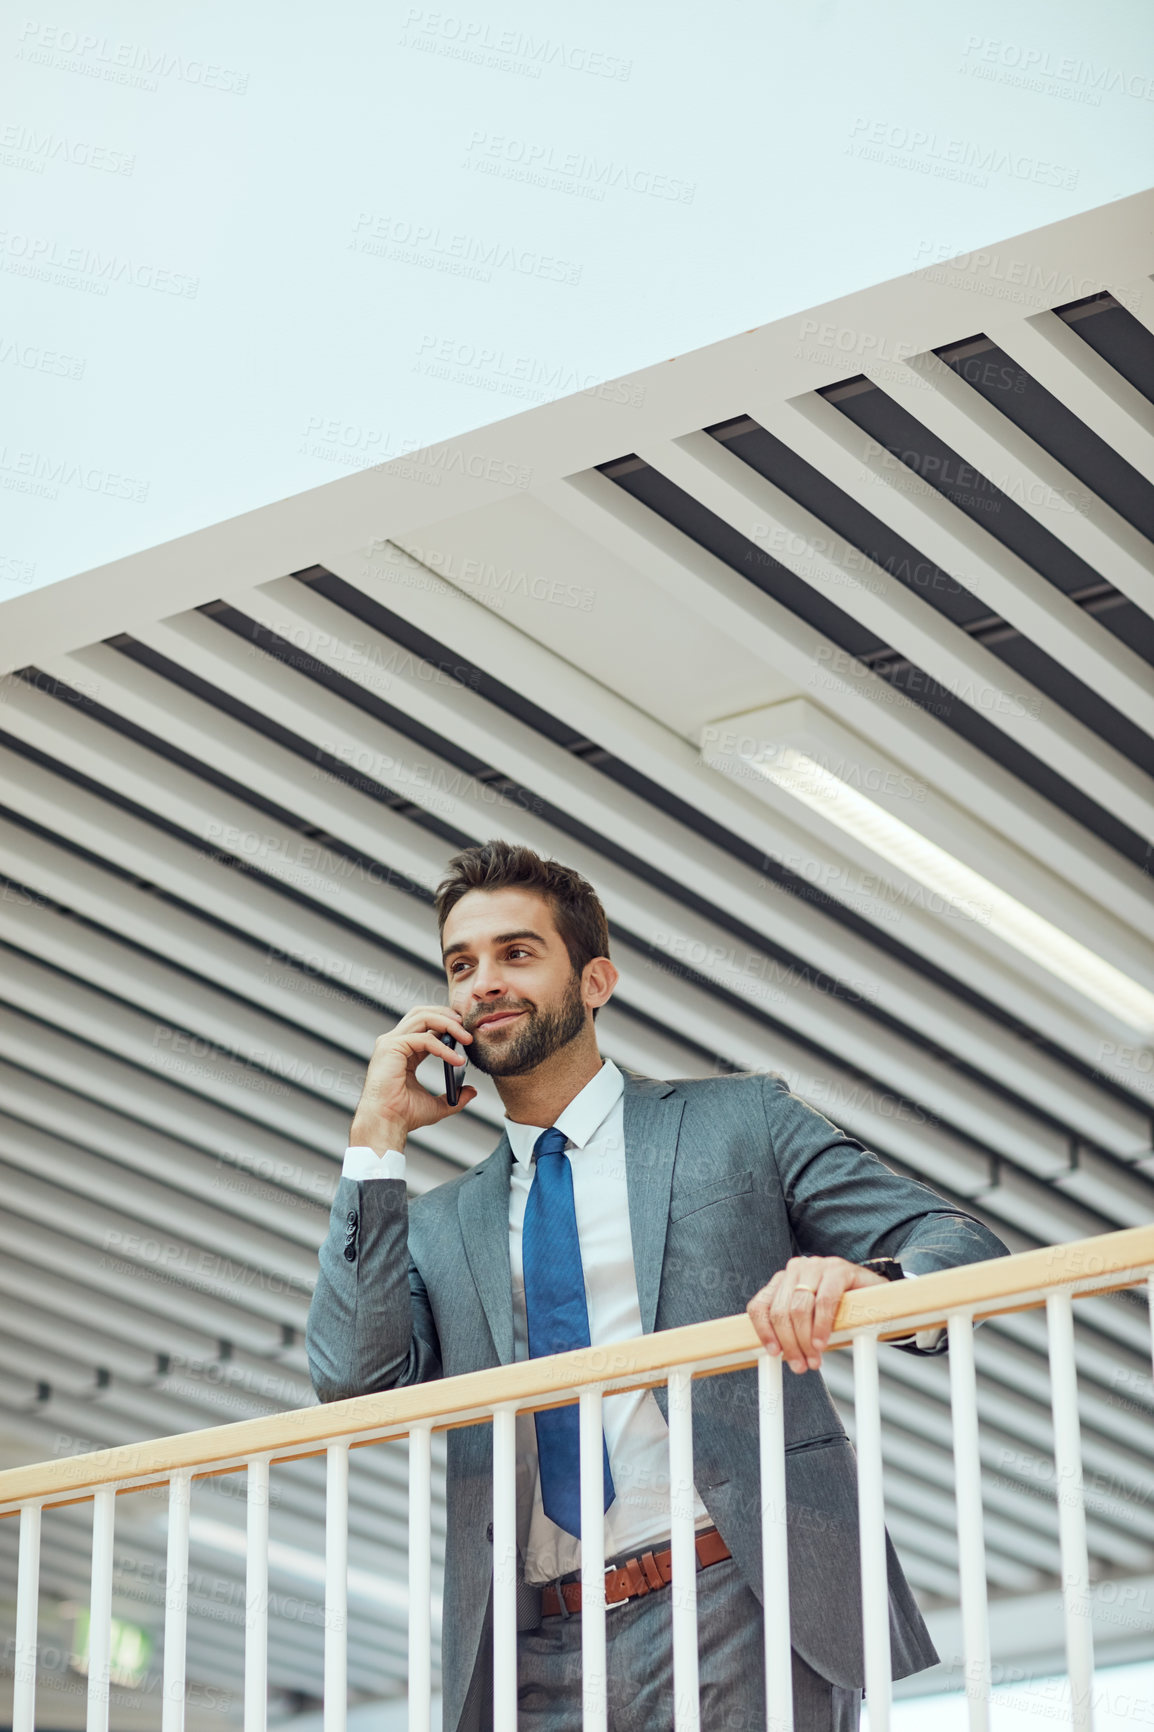 Buy stock photo Shot of a young businessman talking on a cellphone in an office